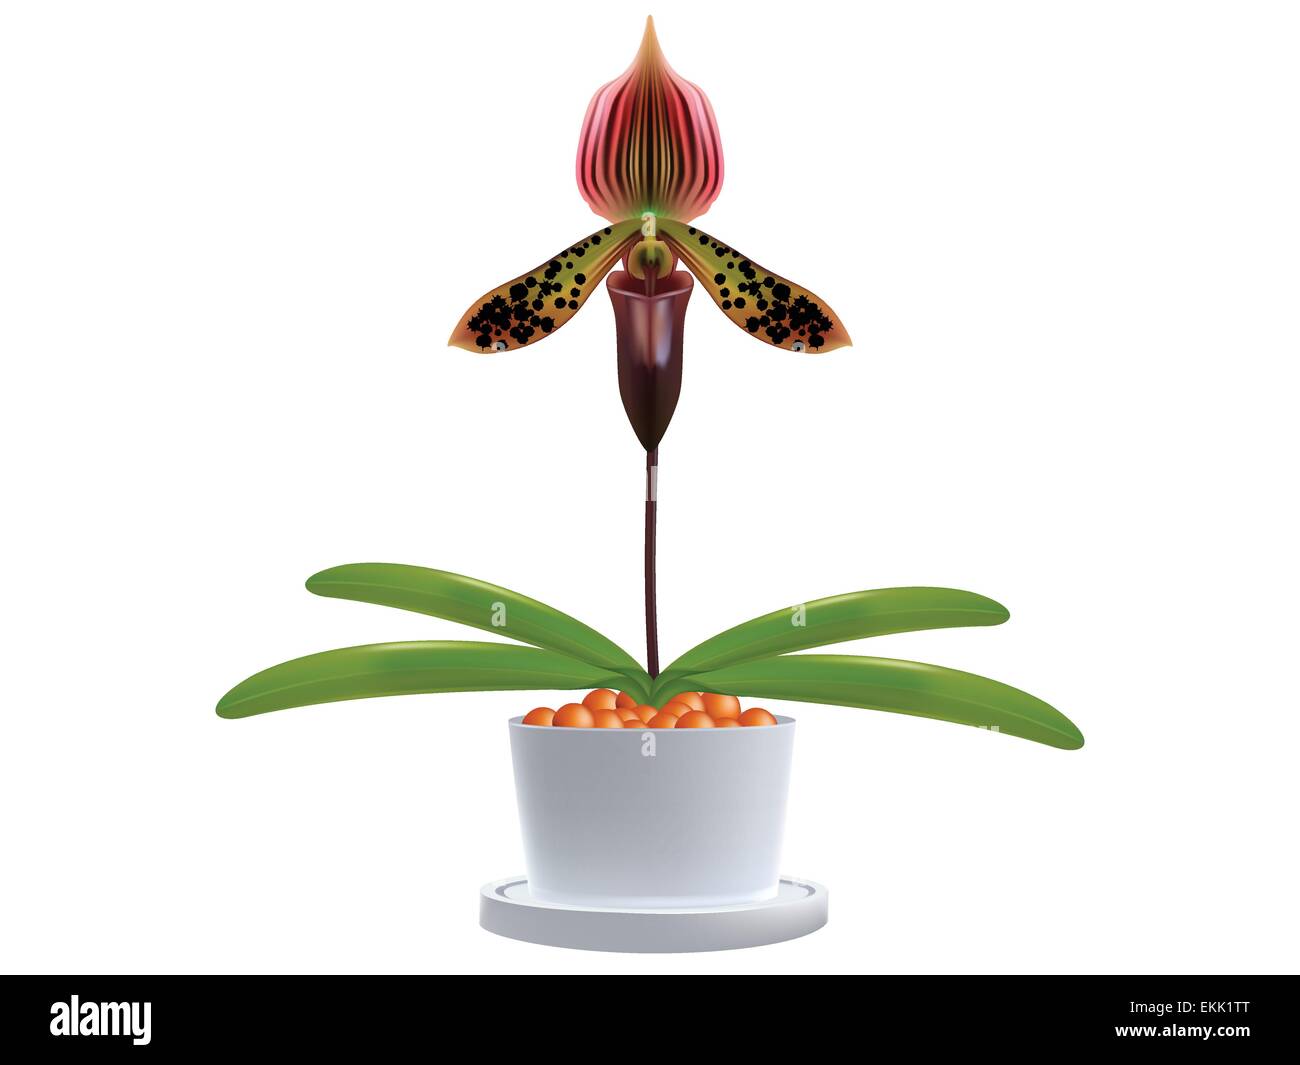 Lady's slipper orchid. Paphiopedilum Callosum Isolated on a white background. Stock Vector